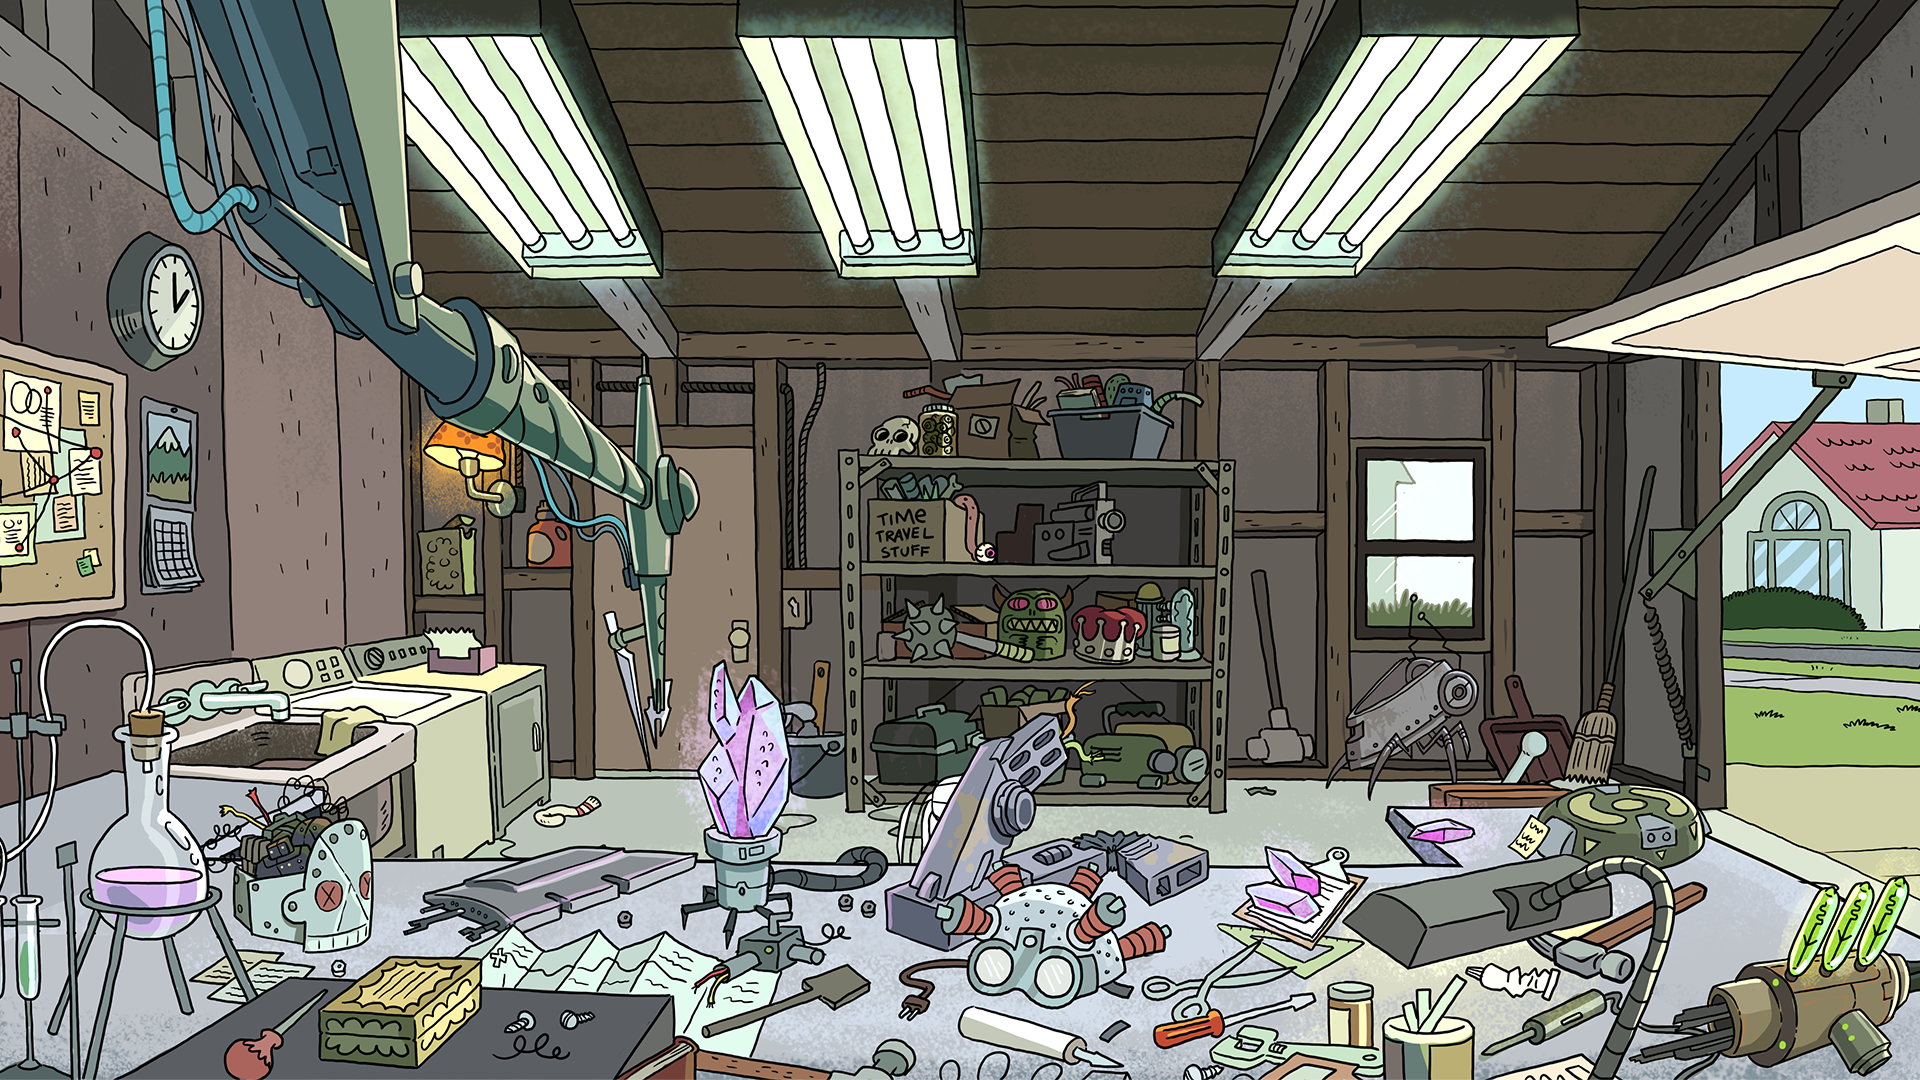 Rick And Morty Virtual Backgrounds Arrive For Zoom Video Conferencing ...